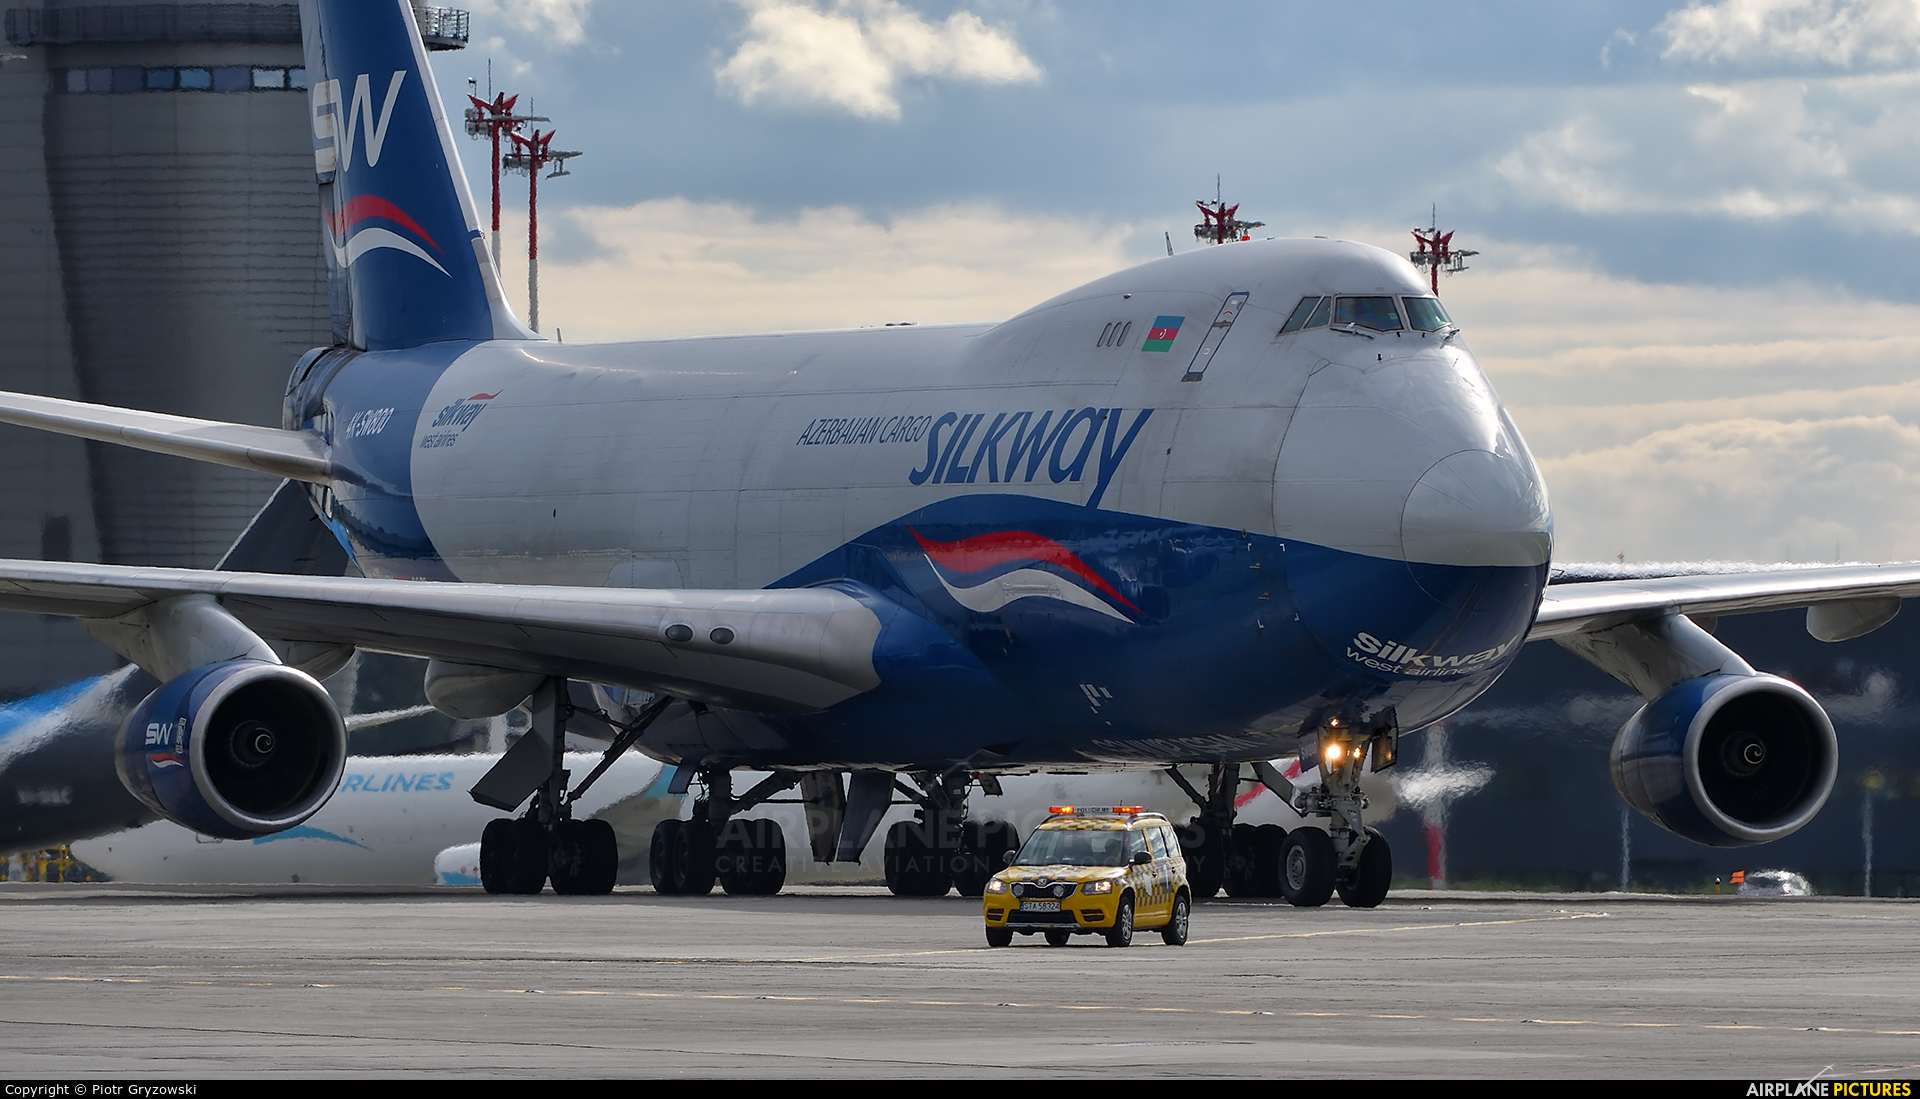 Silk Way West Airlines 4K-SW800 aircraft at Katowice - Pyrzowice